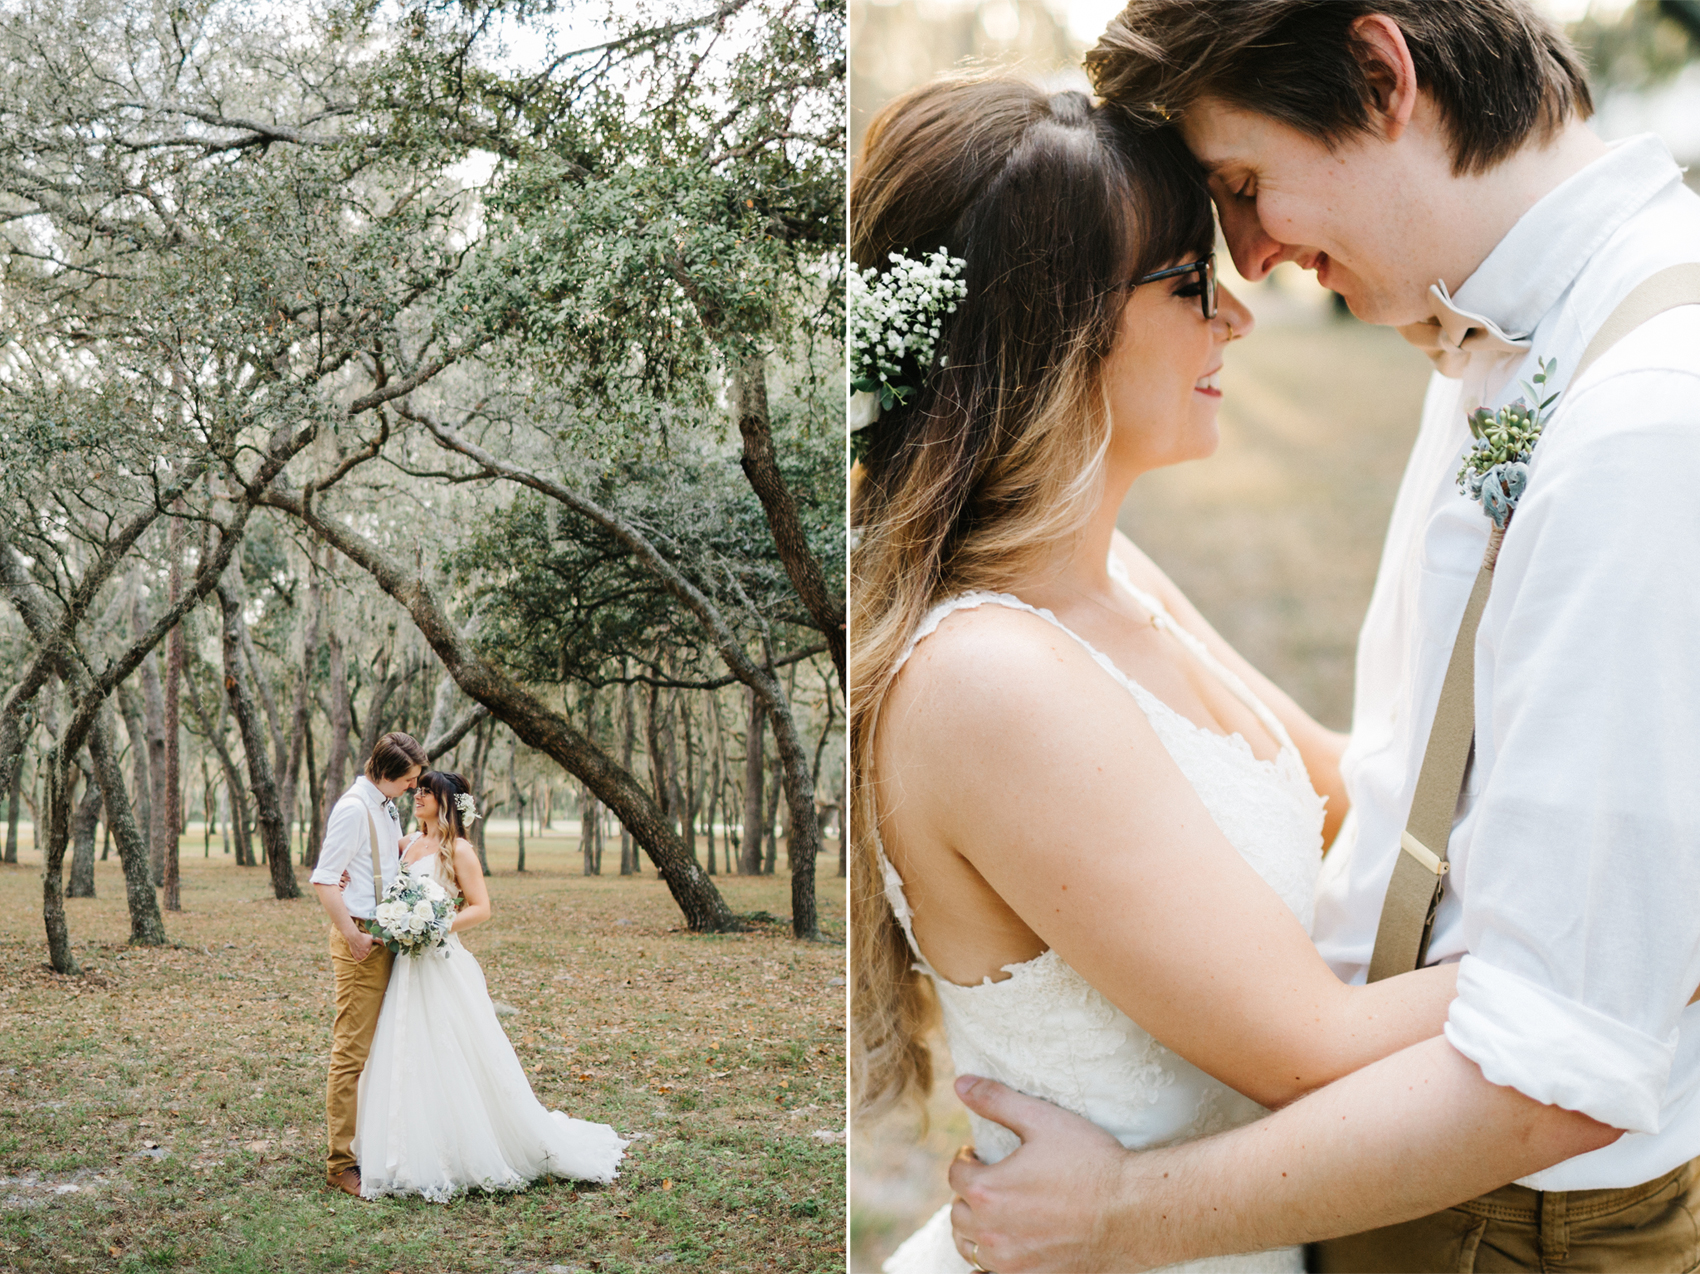 Woodsy Boho Wedding at The Lange Farm under the oak trees and a barn reception with twinkle lights